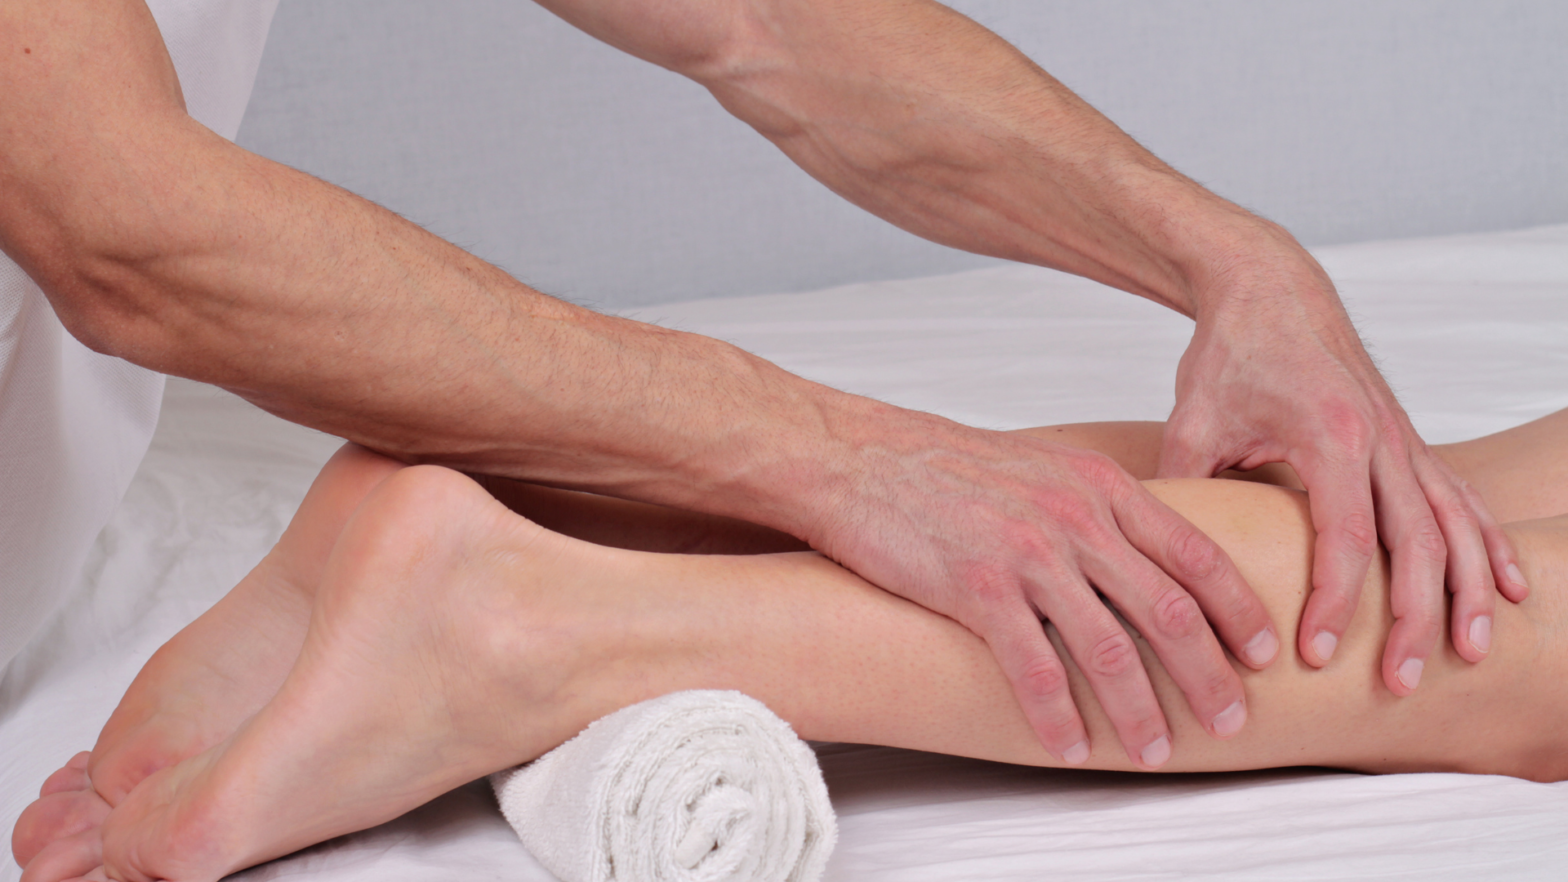 Woman receiving Sports Massage therapy with therapist's hands focusing on her leg.